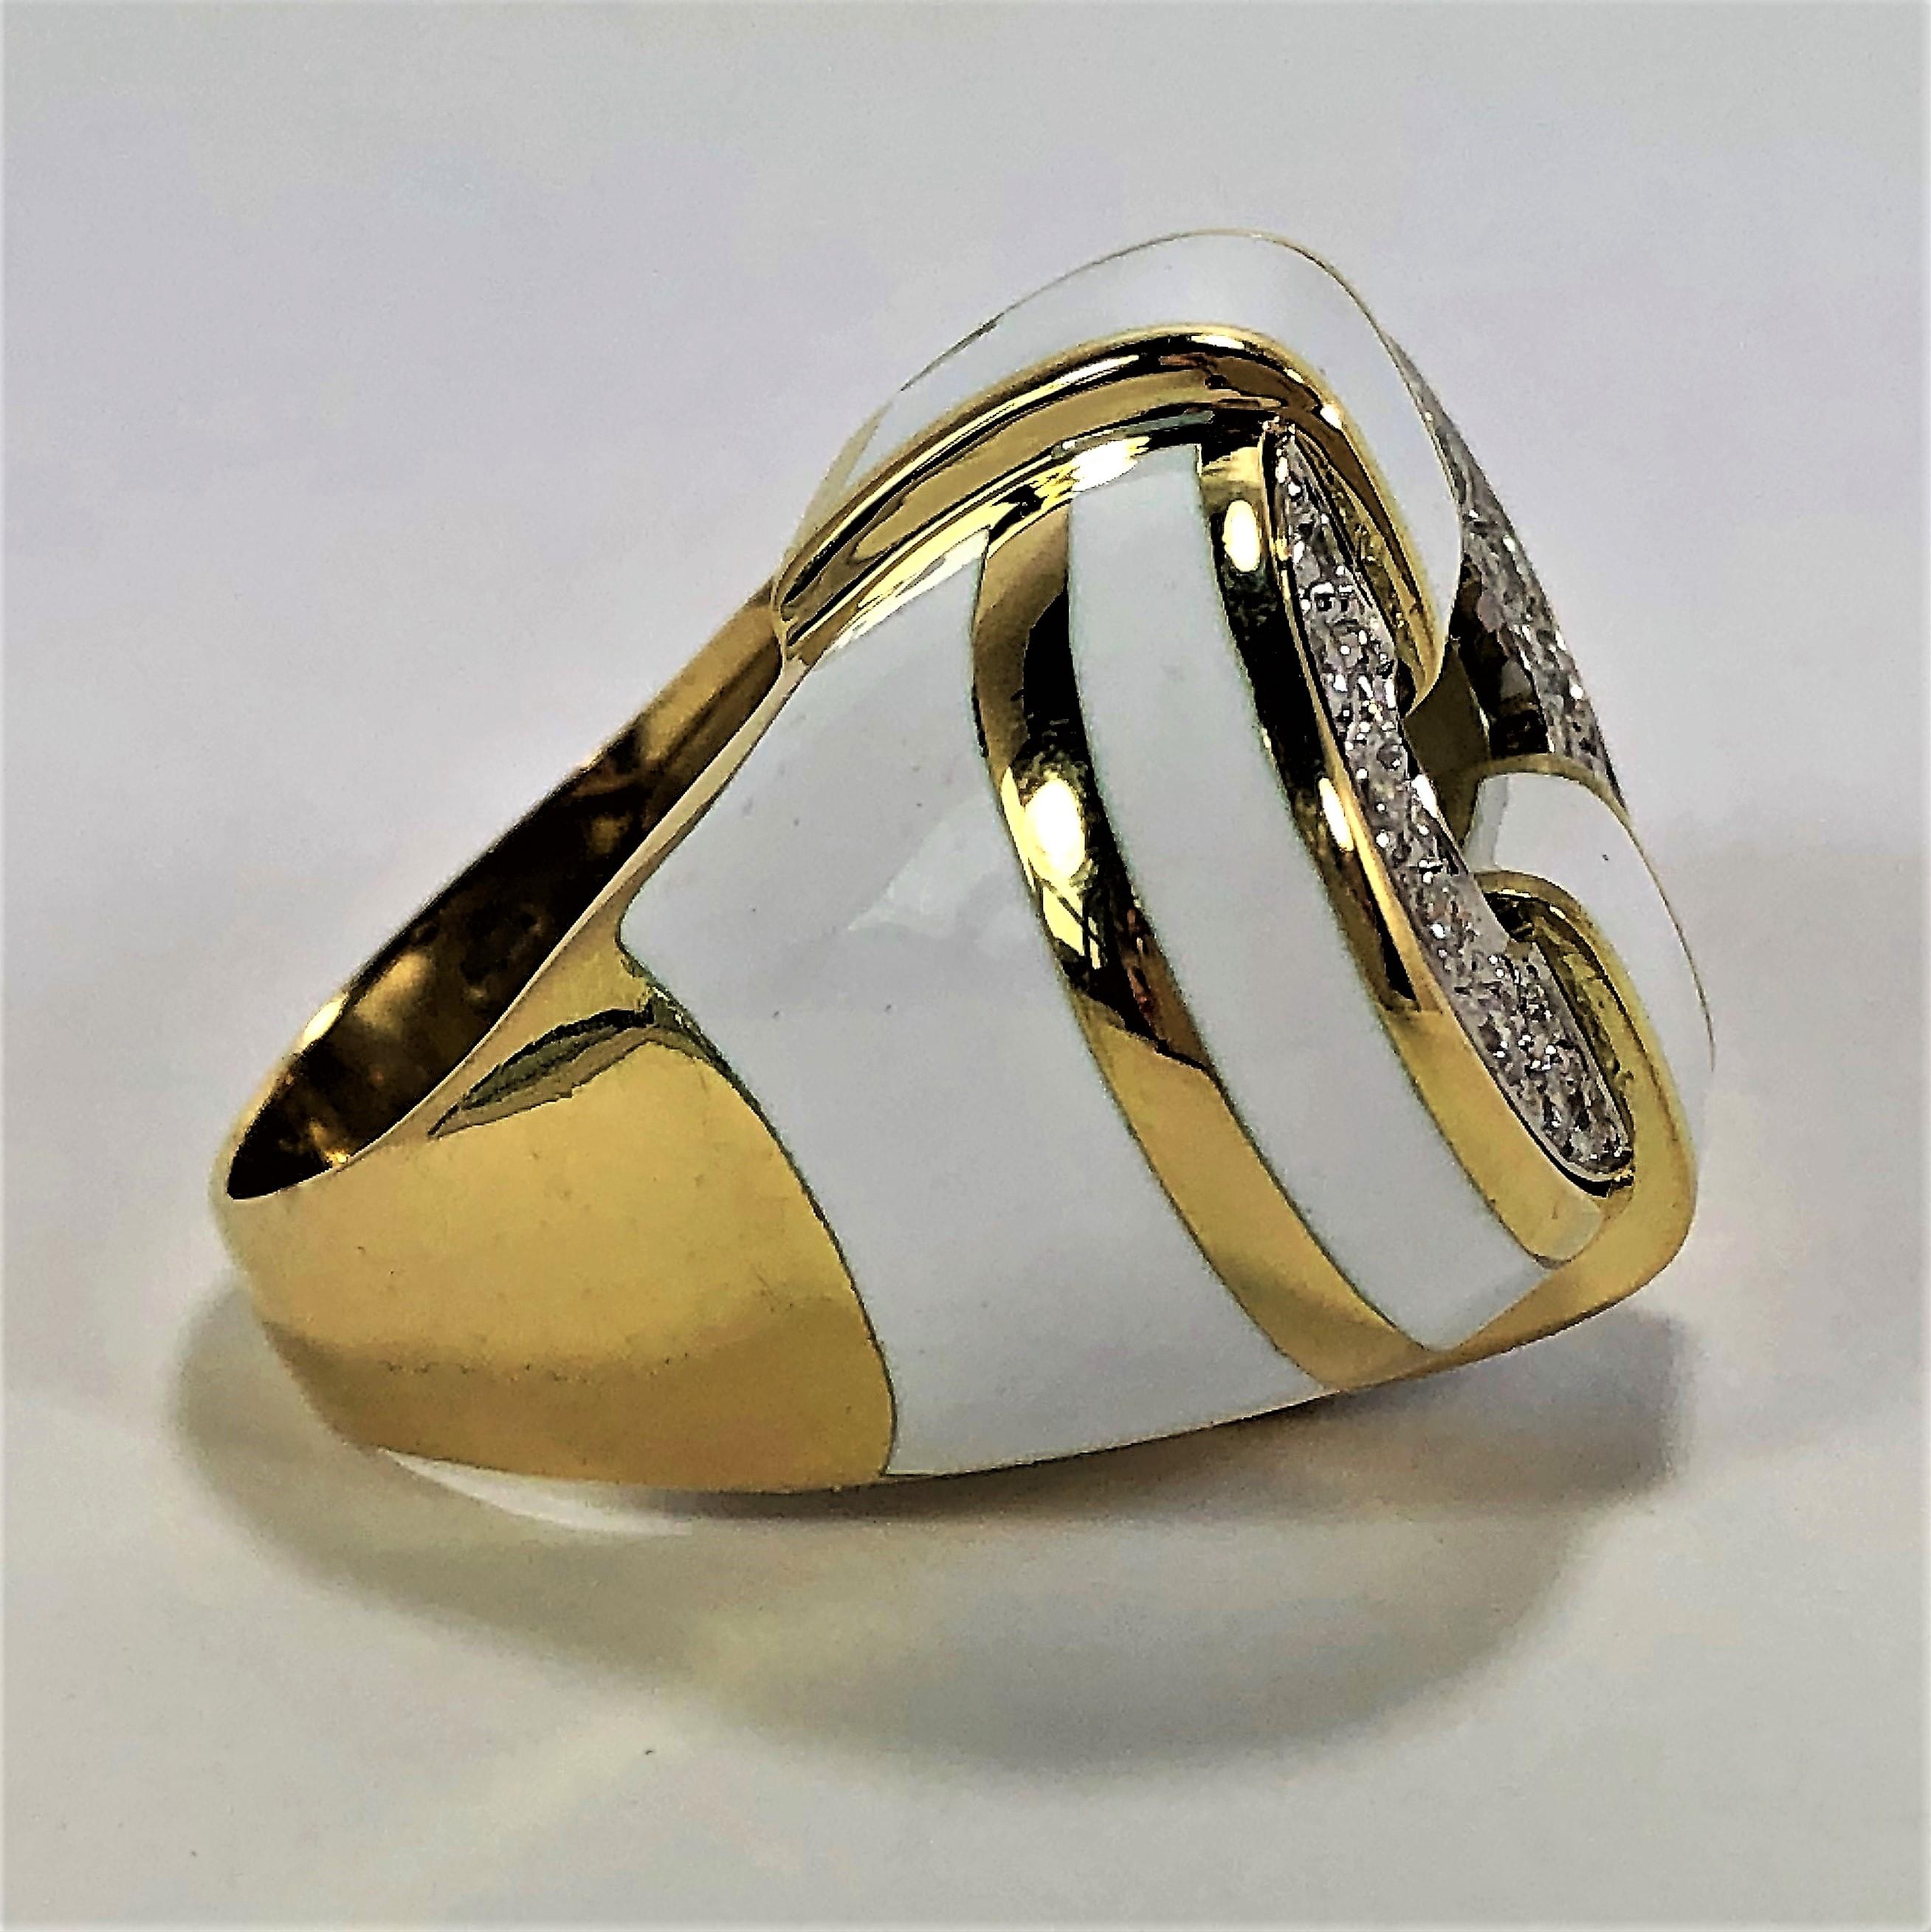 A ladies 18K yellow gold ring featuring a pave' set top, and white enamel. There are 26 round brilliant cut diamonds of overall G/H color and VS1/VS2 clarity and sparkle to the design. With a design area measuring 7/8 of an inch by 1 1/8 inches it